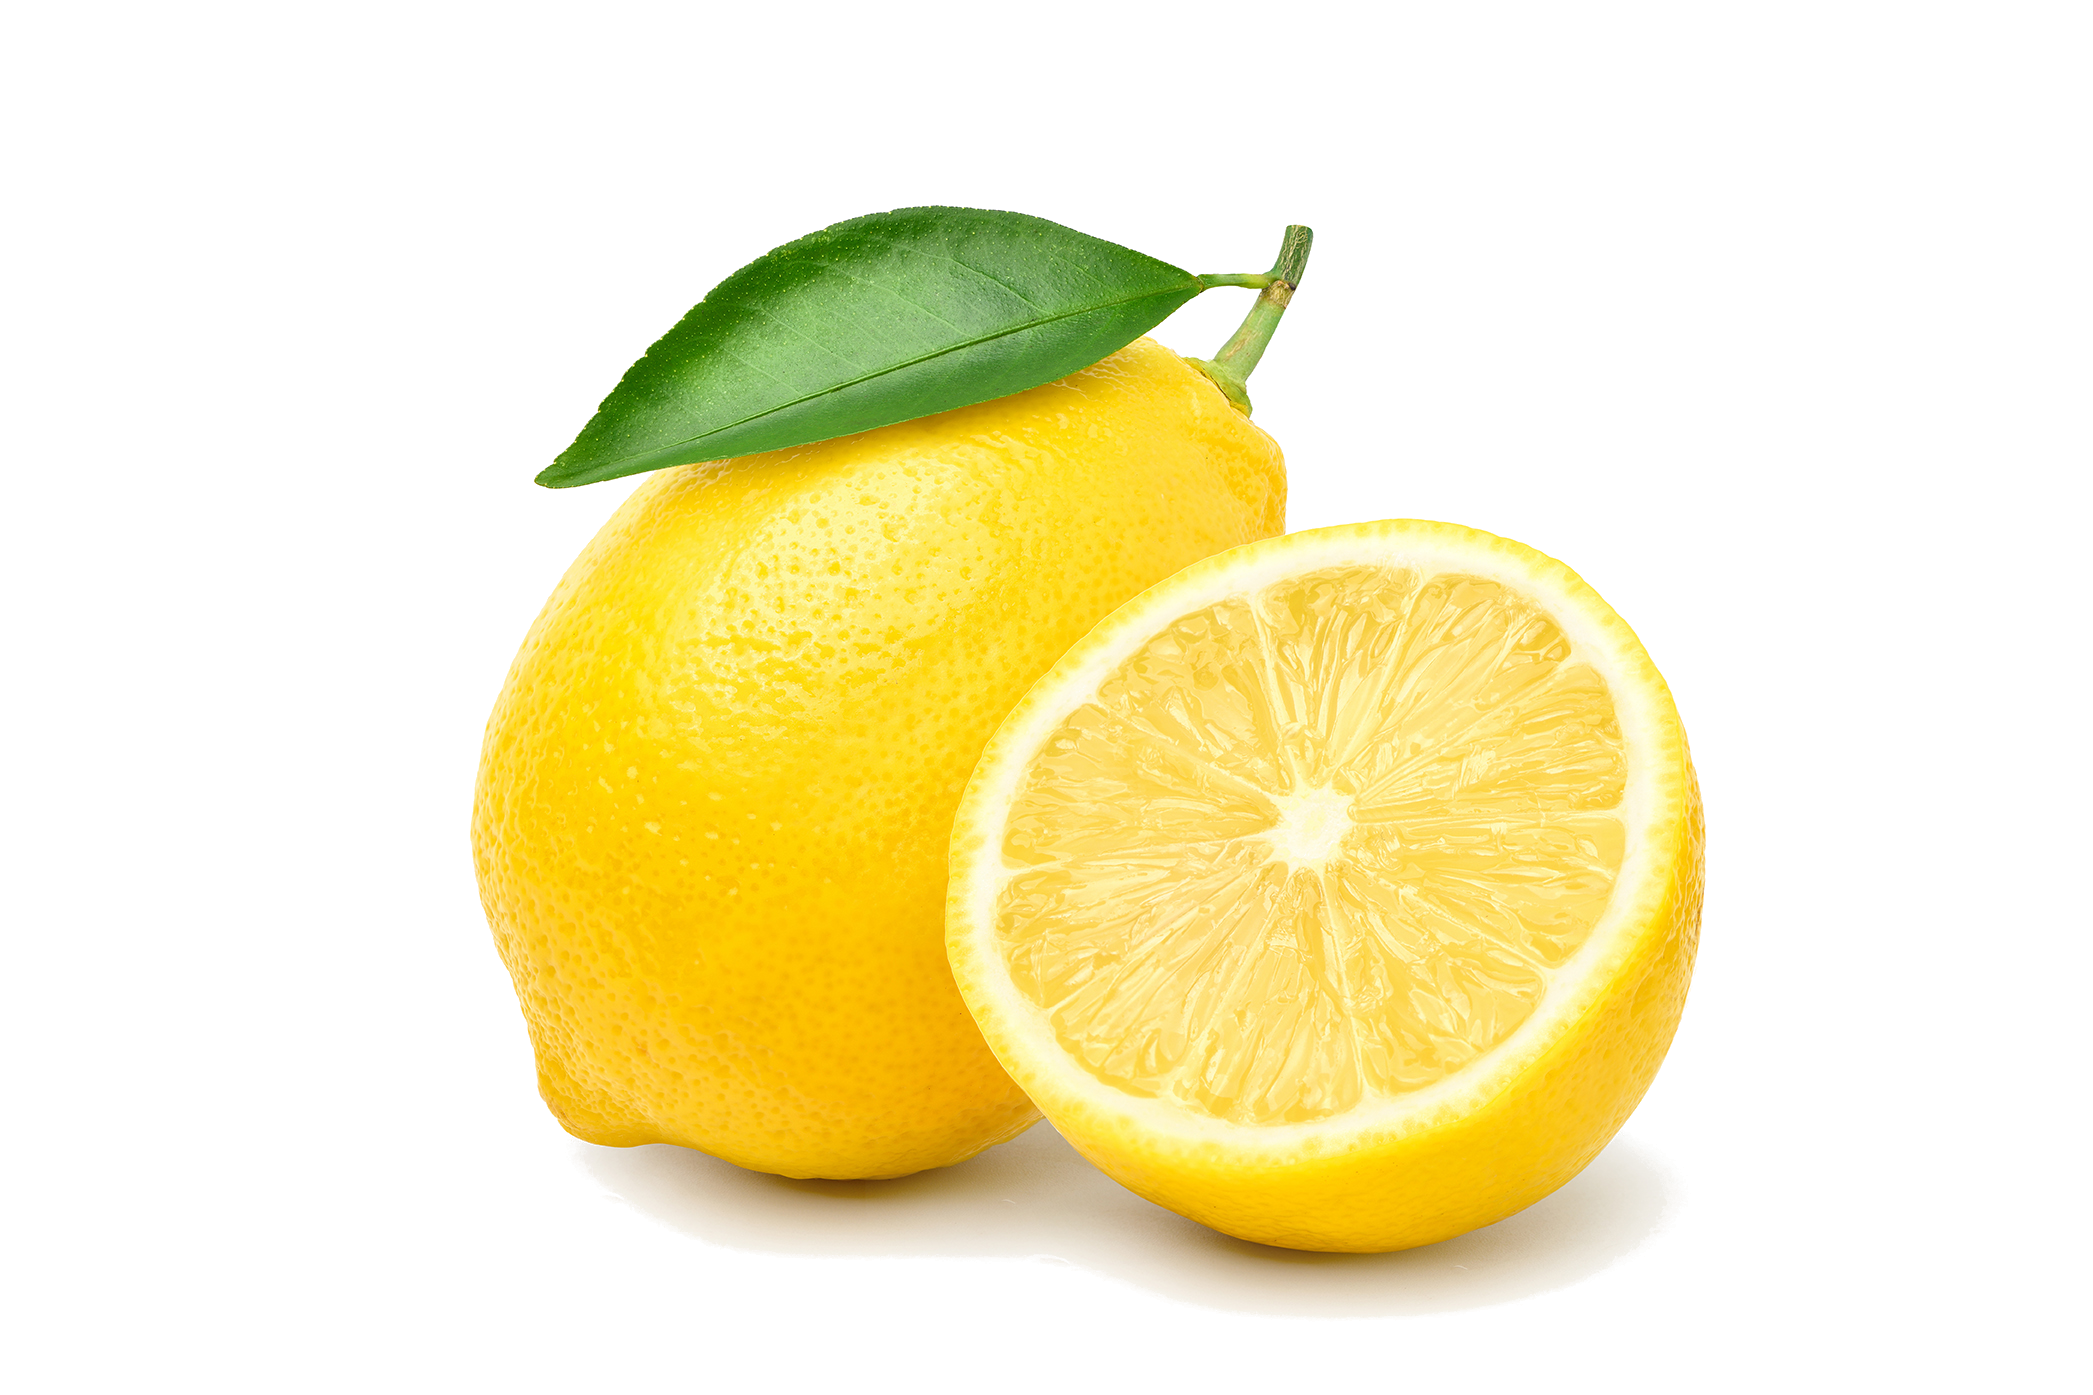 Lemon Eureka-It is a very juicy and flavorful lemon, with middle size and spherical shaped. It is quite seedless. Production time is from March to May.